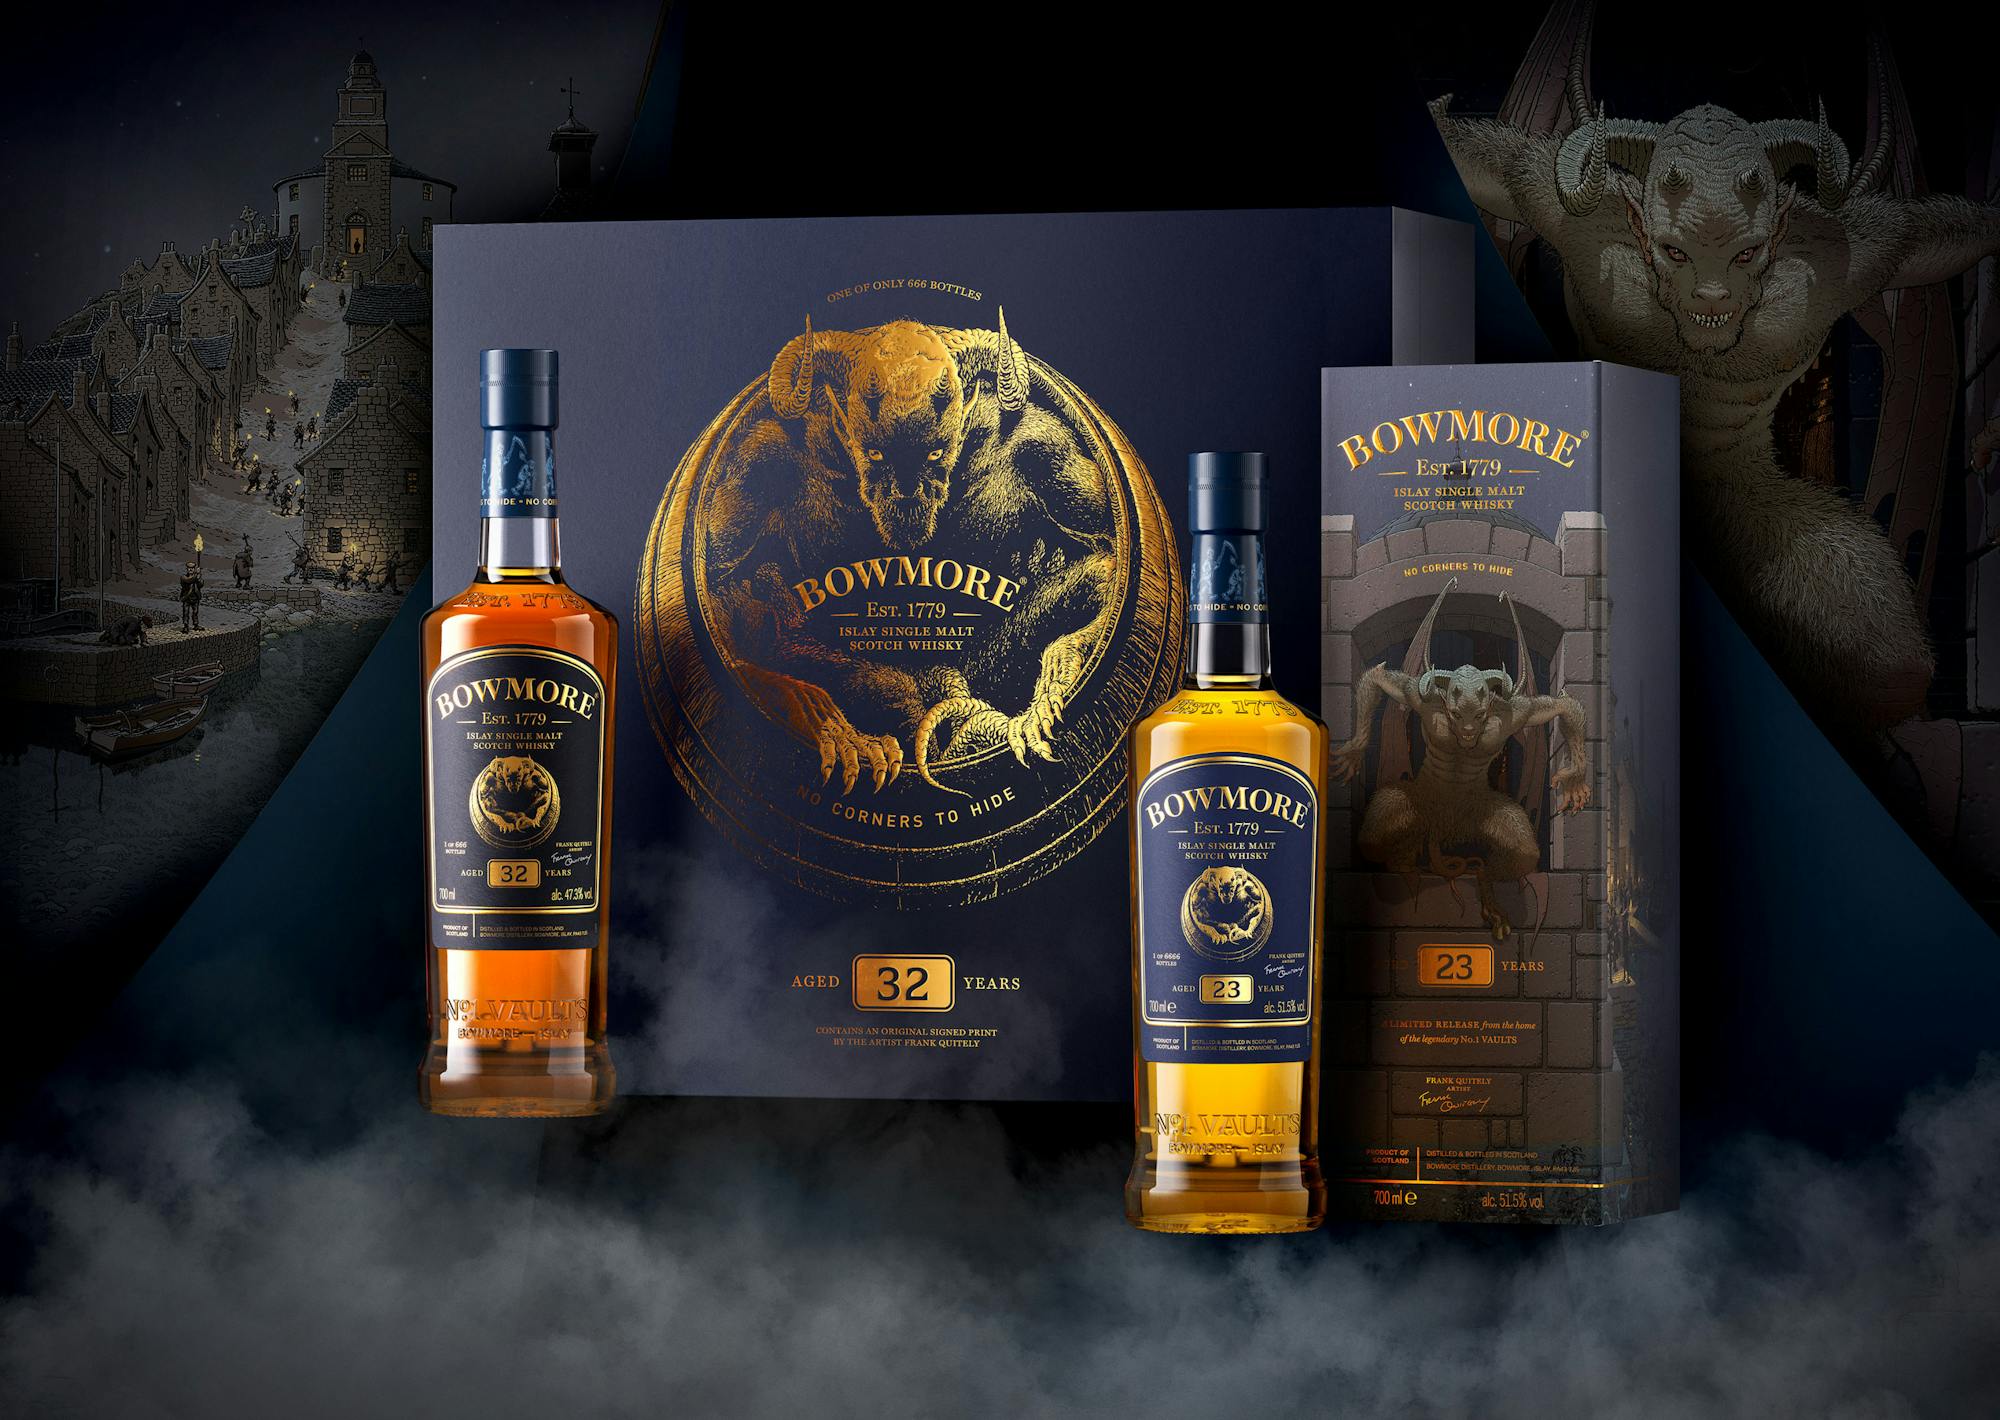 Member News Legends Reimagined. Introducing Bowmore: No Corners to Hide 